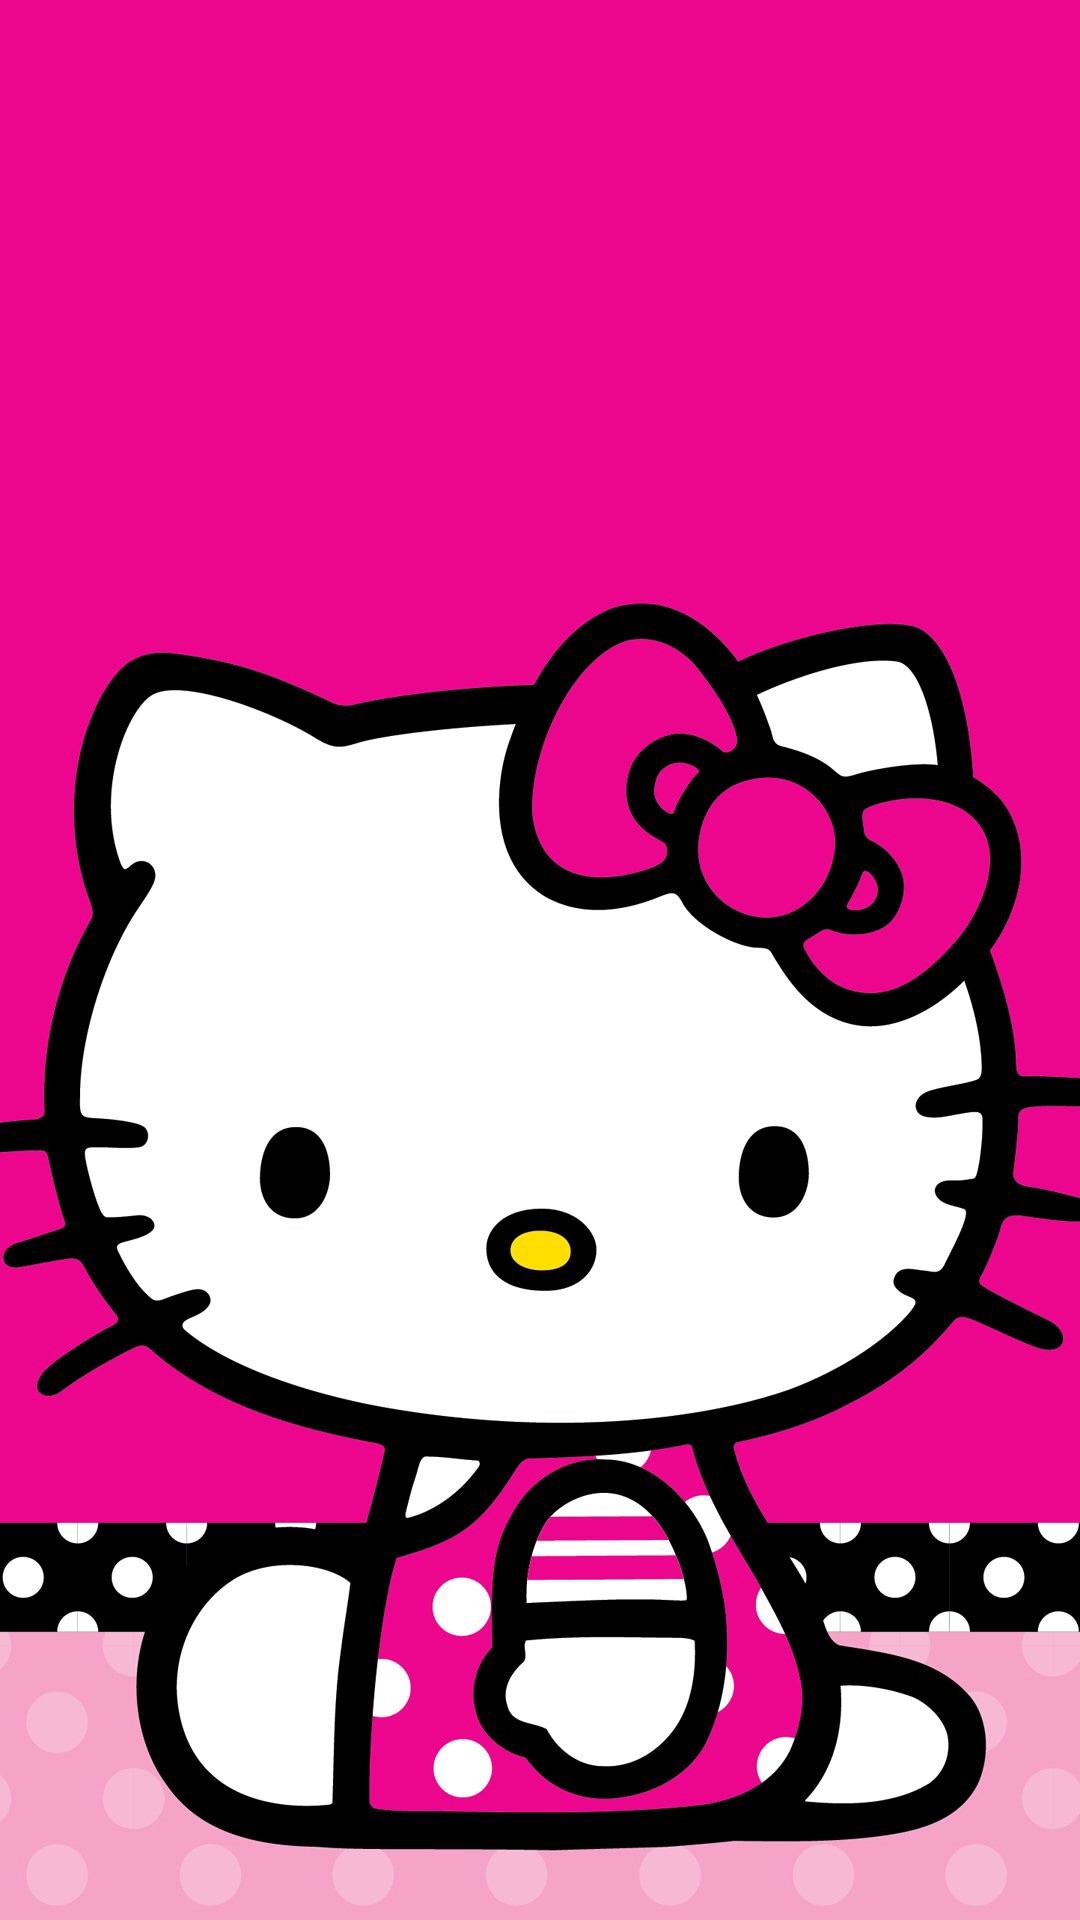 1080x1920 Hello Kitty. Hd Wallpapers For IphoneWallpaper ...